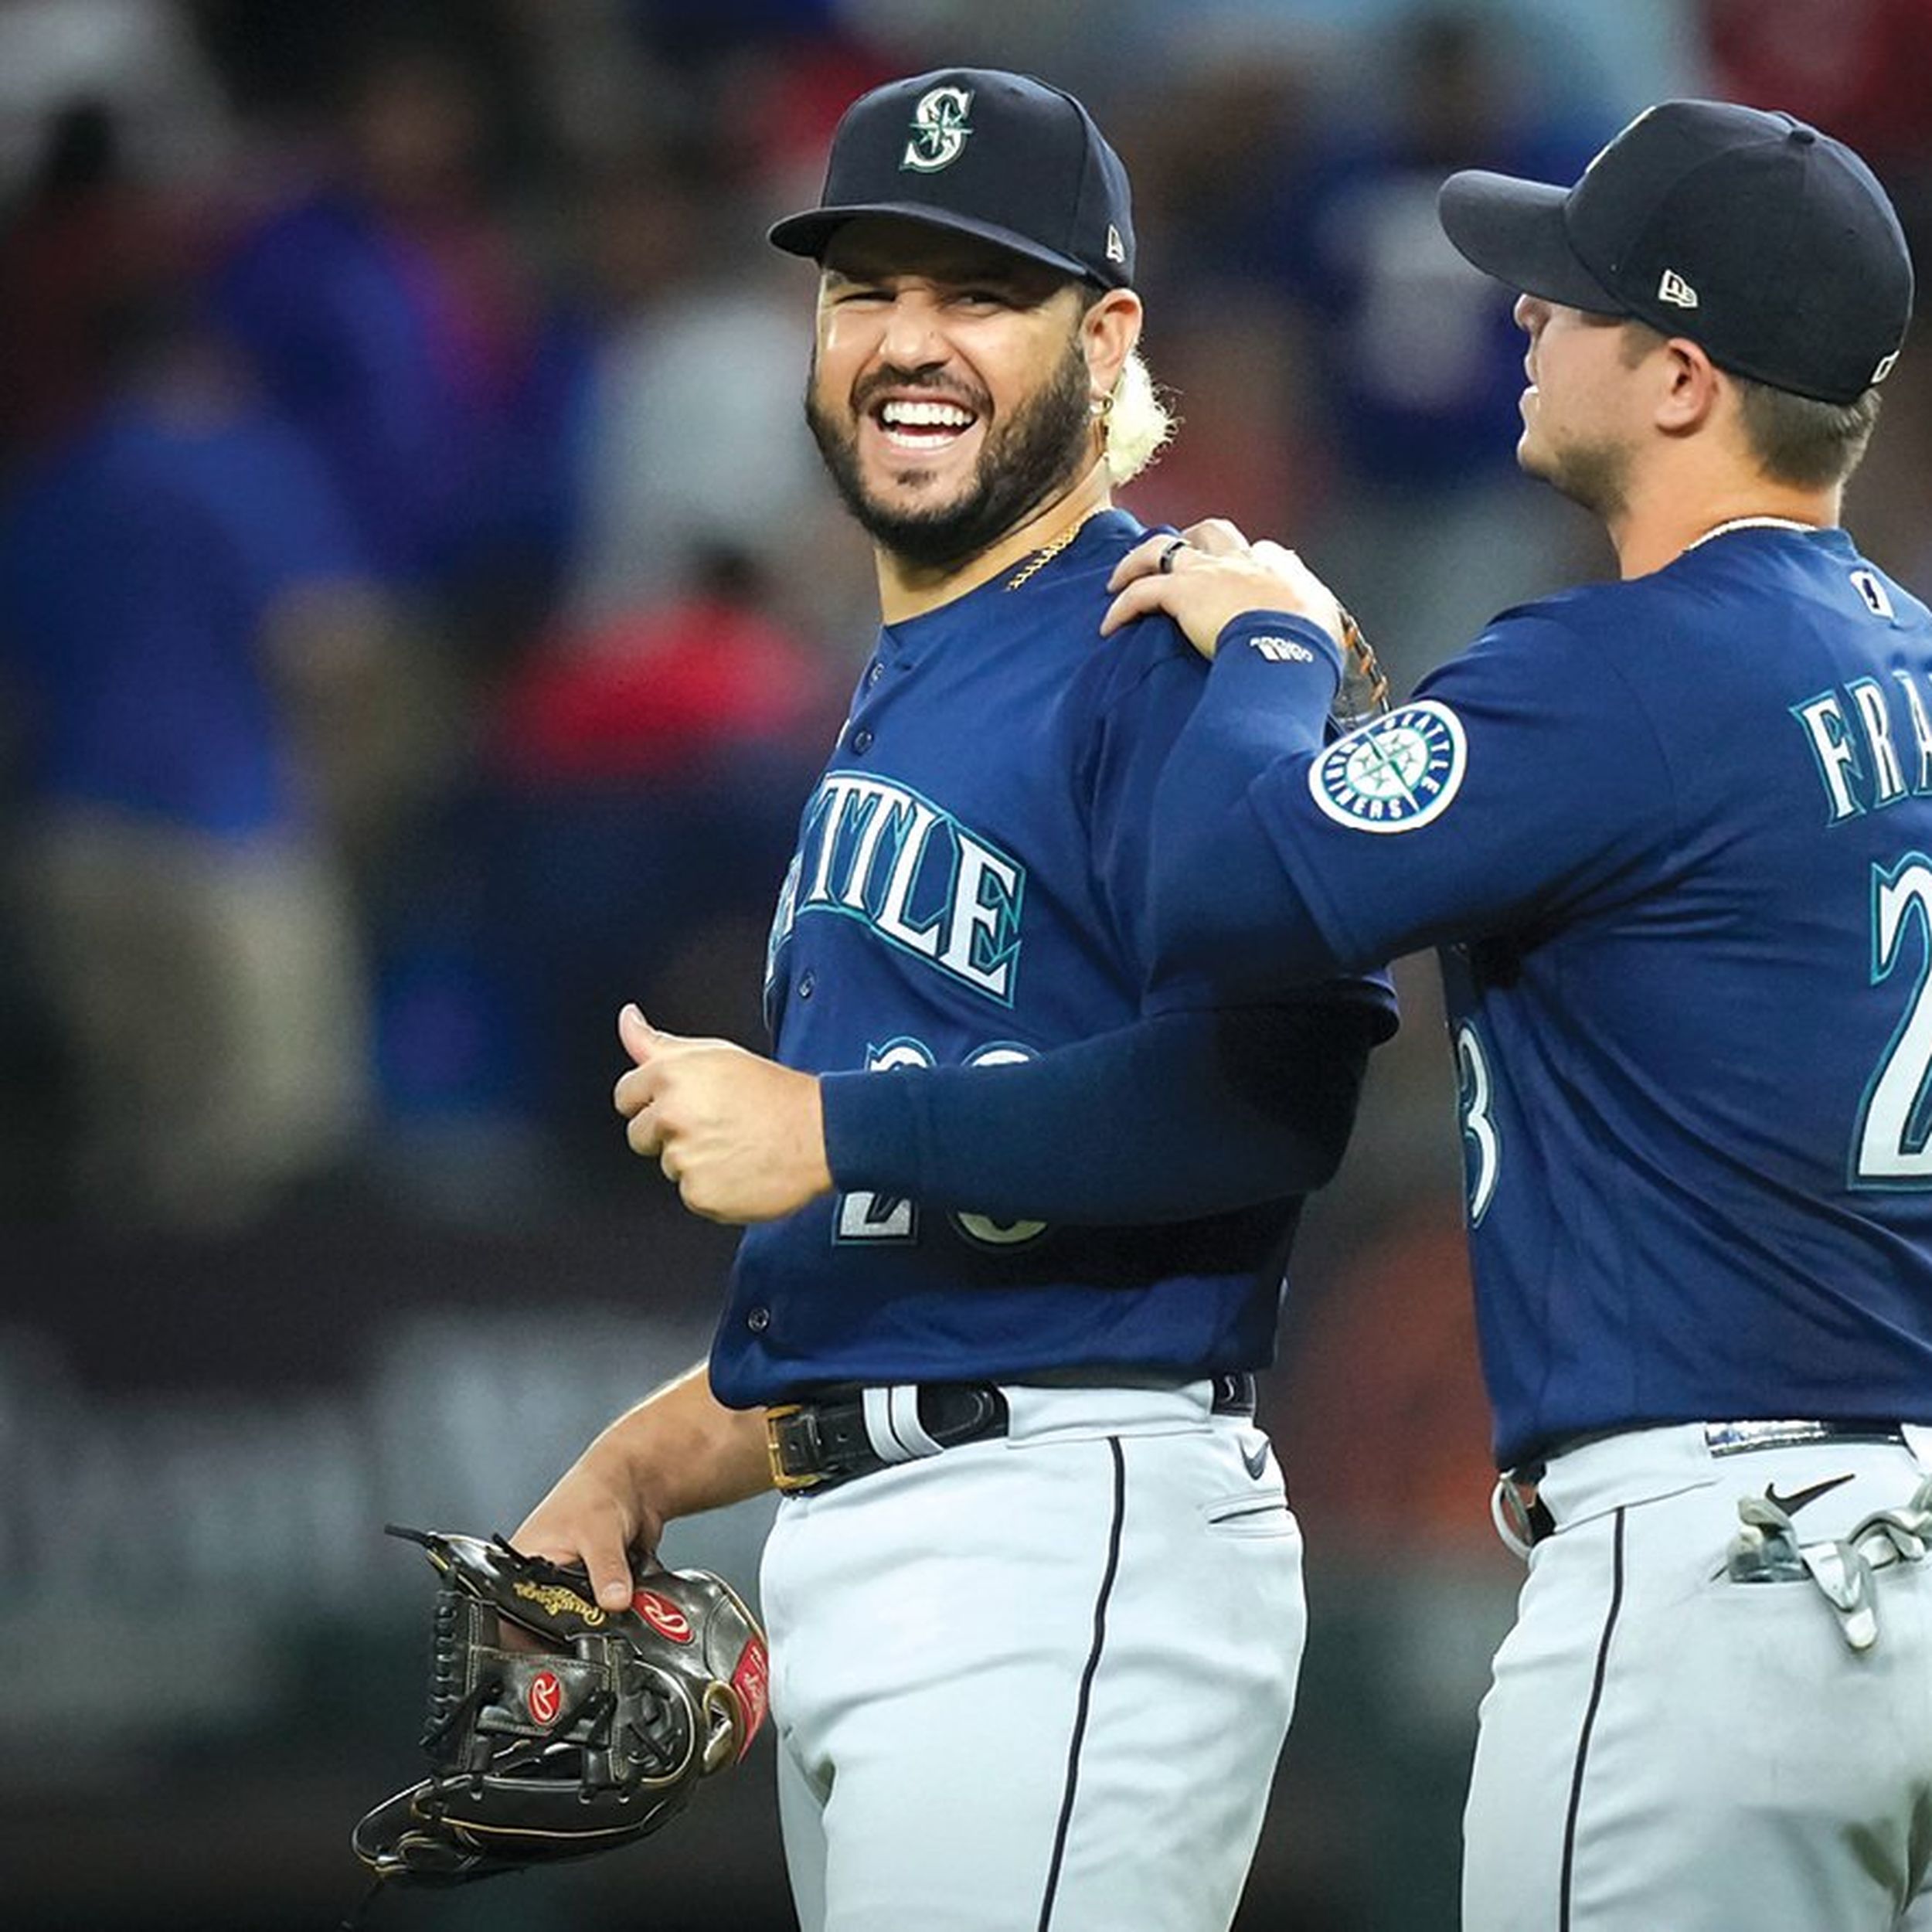 Mariners fans experience 'pile of emotions' after 21-year playoff drought  ends